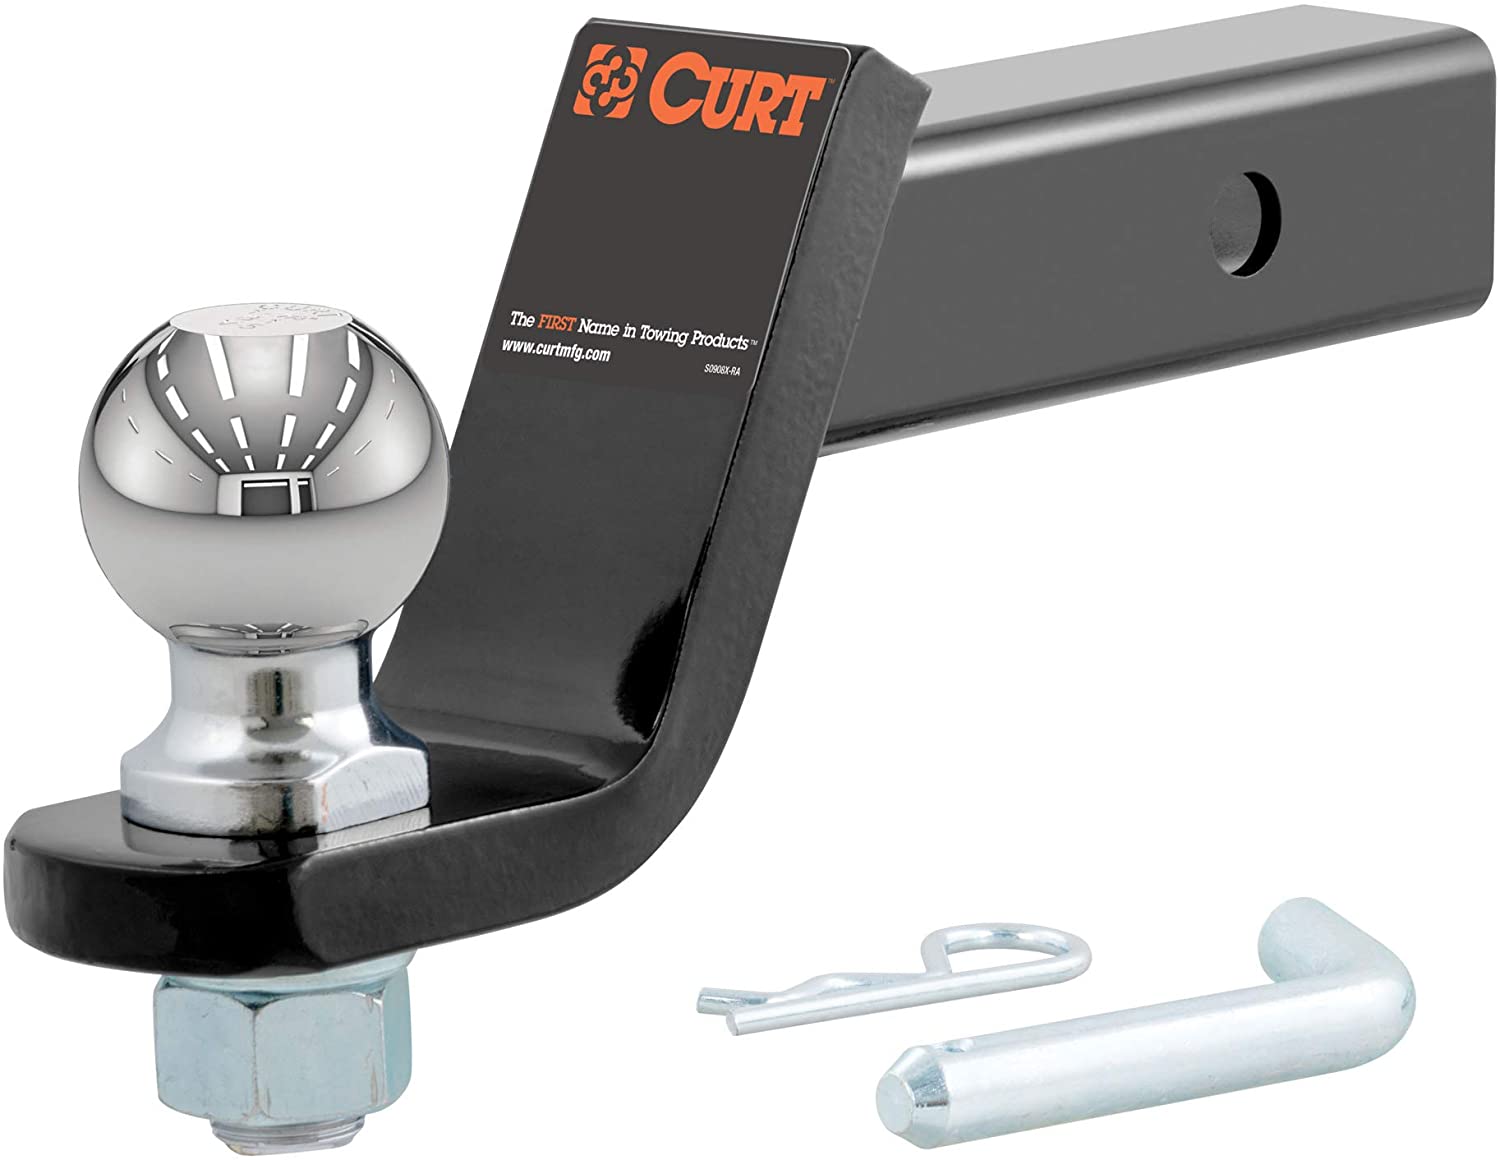 CURT 45042 Trailer Hitch Mount with 2-5/16-Inch Ball & Pin, Fits 2-Inch Receiver, 7,500 lbs, 4-Inch Drop